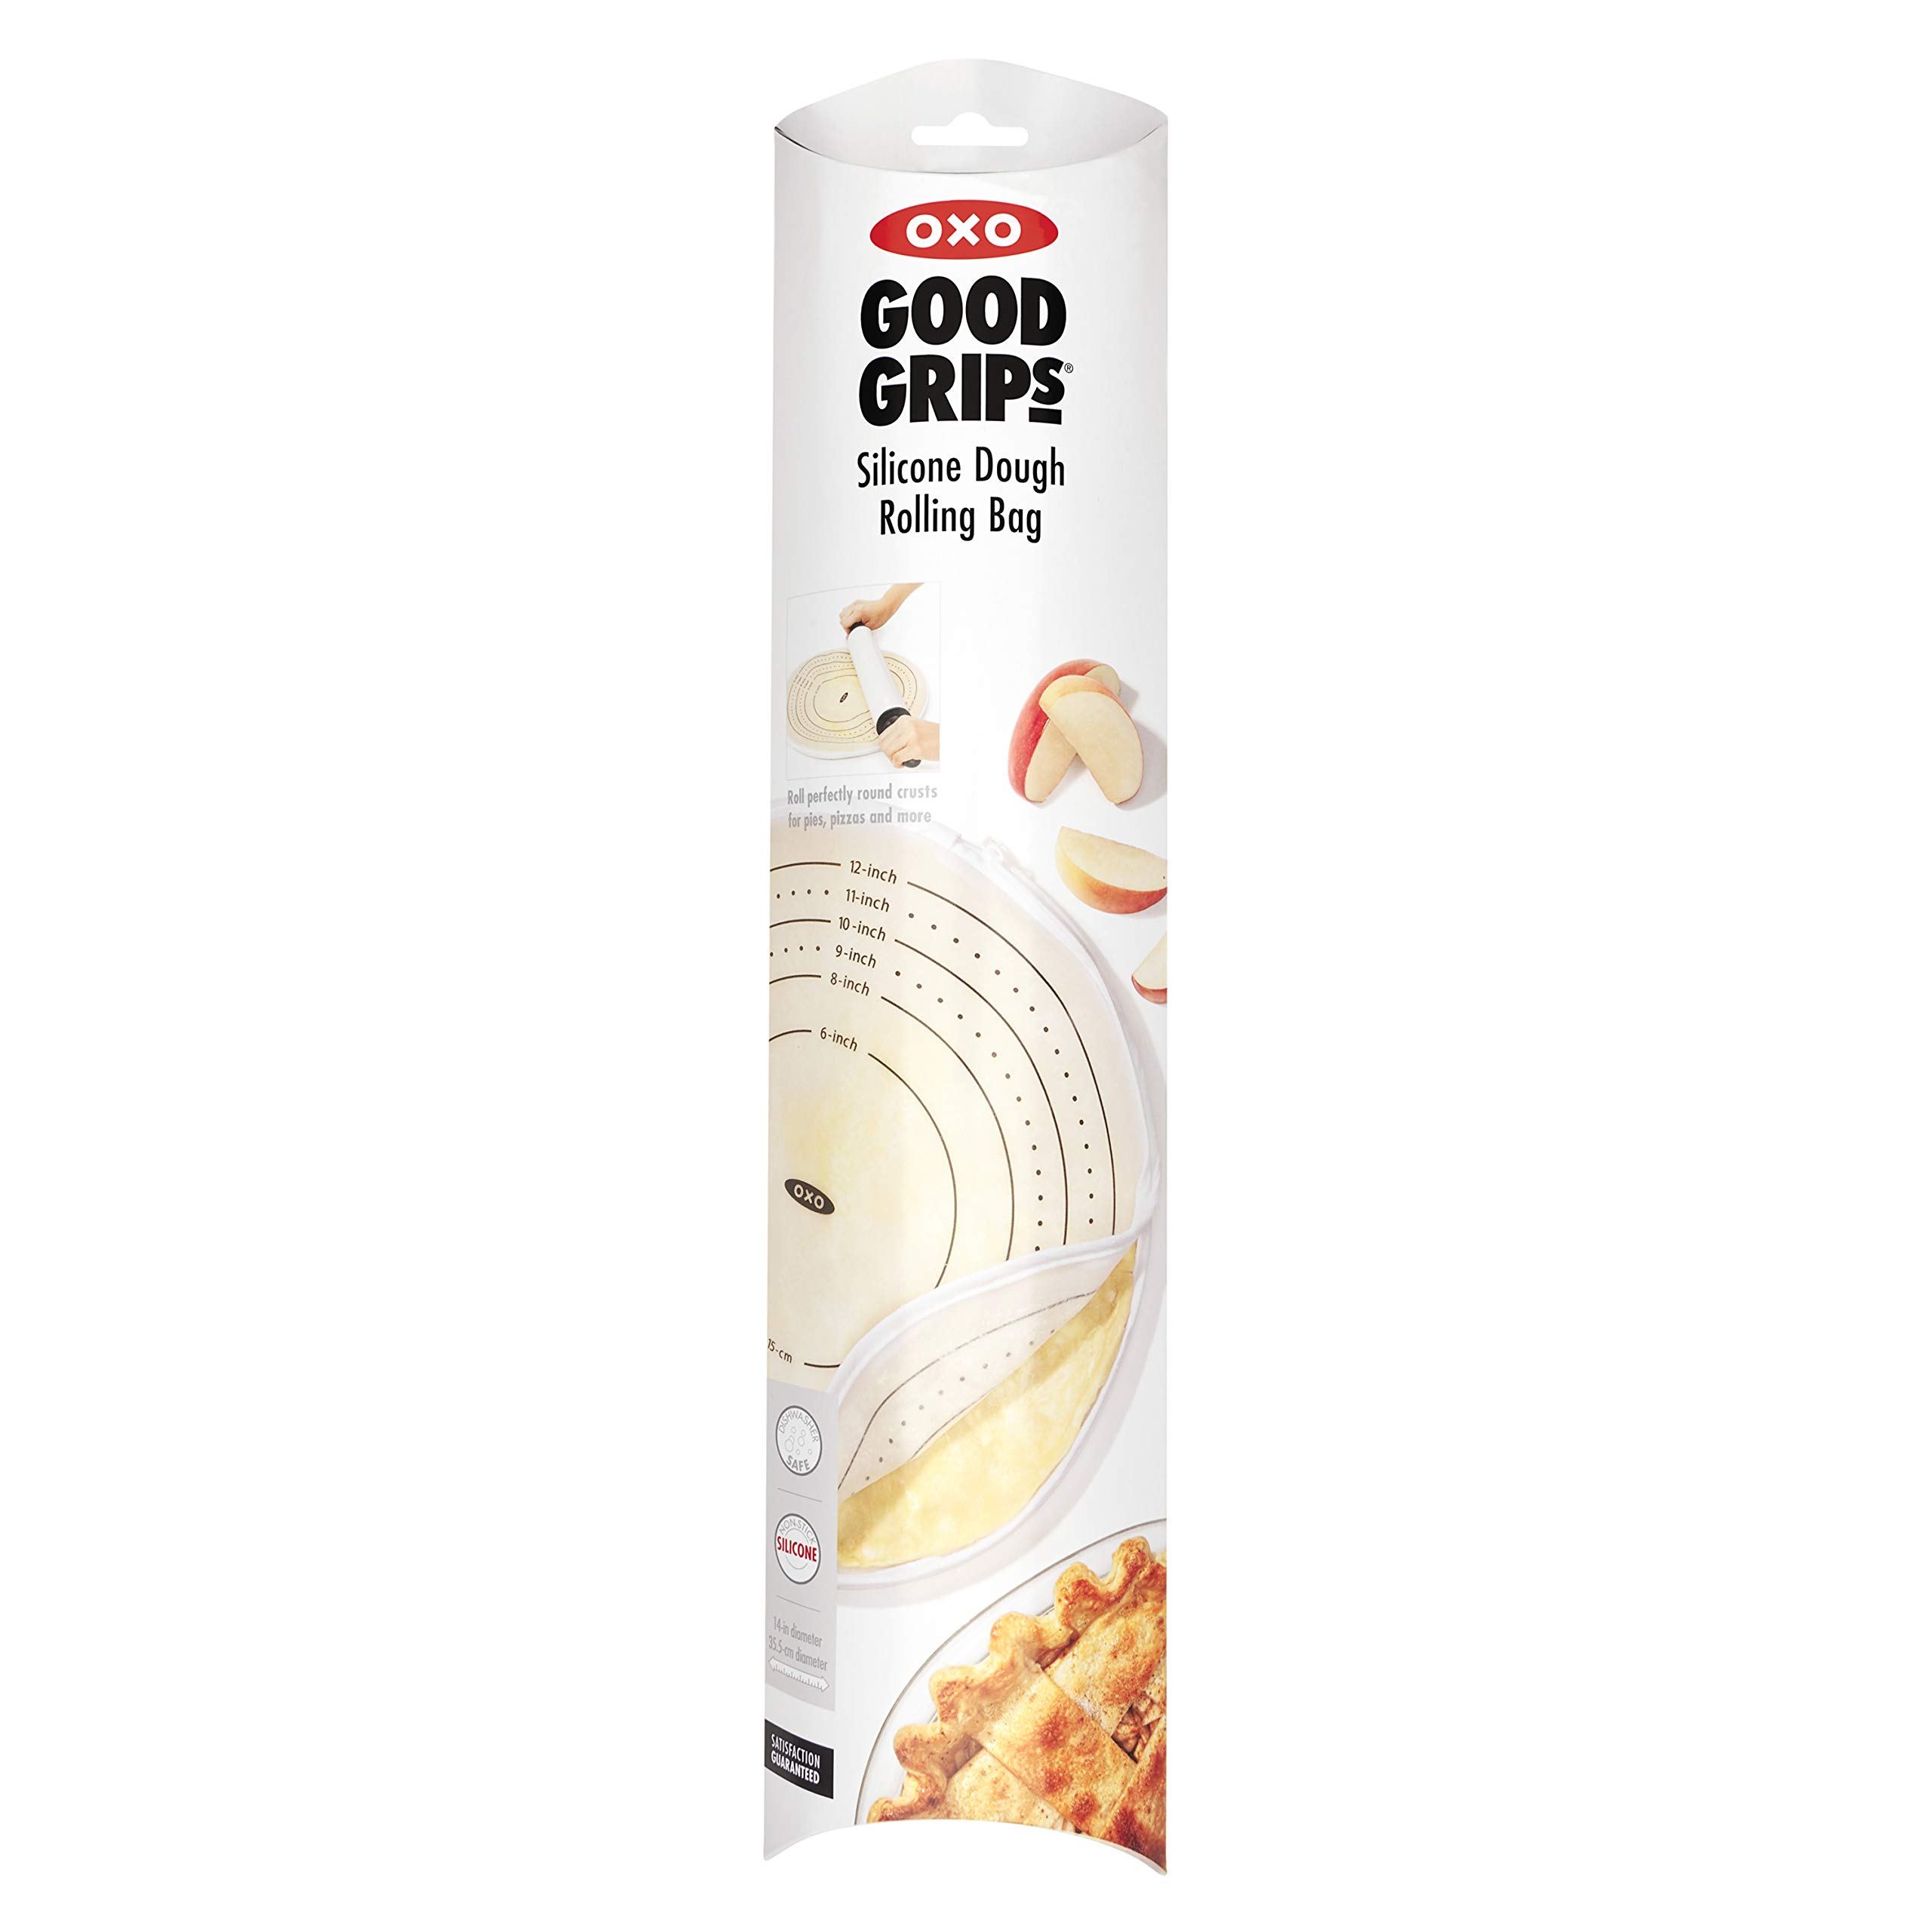 OXO Good Grips Silicone Dough Rolling Bag